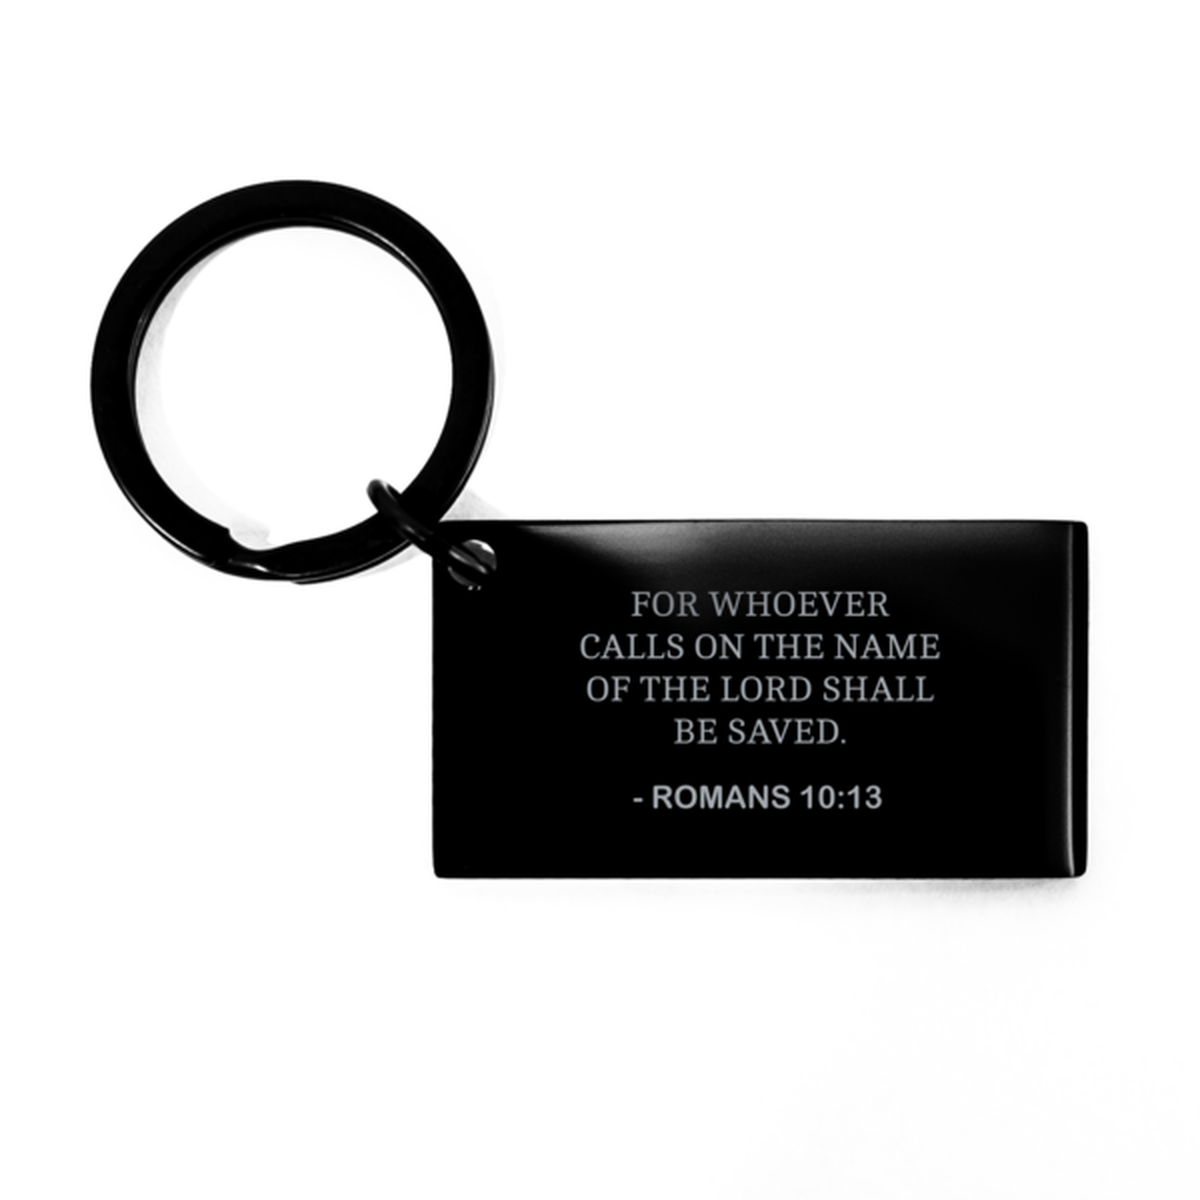 Bible Verse Black Keychain, Romans 10:13 For Whoever Calls On The Name Of The Lord, Christian Inspirational Key Ring Gifts For Men Women